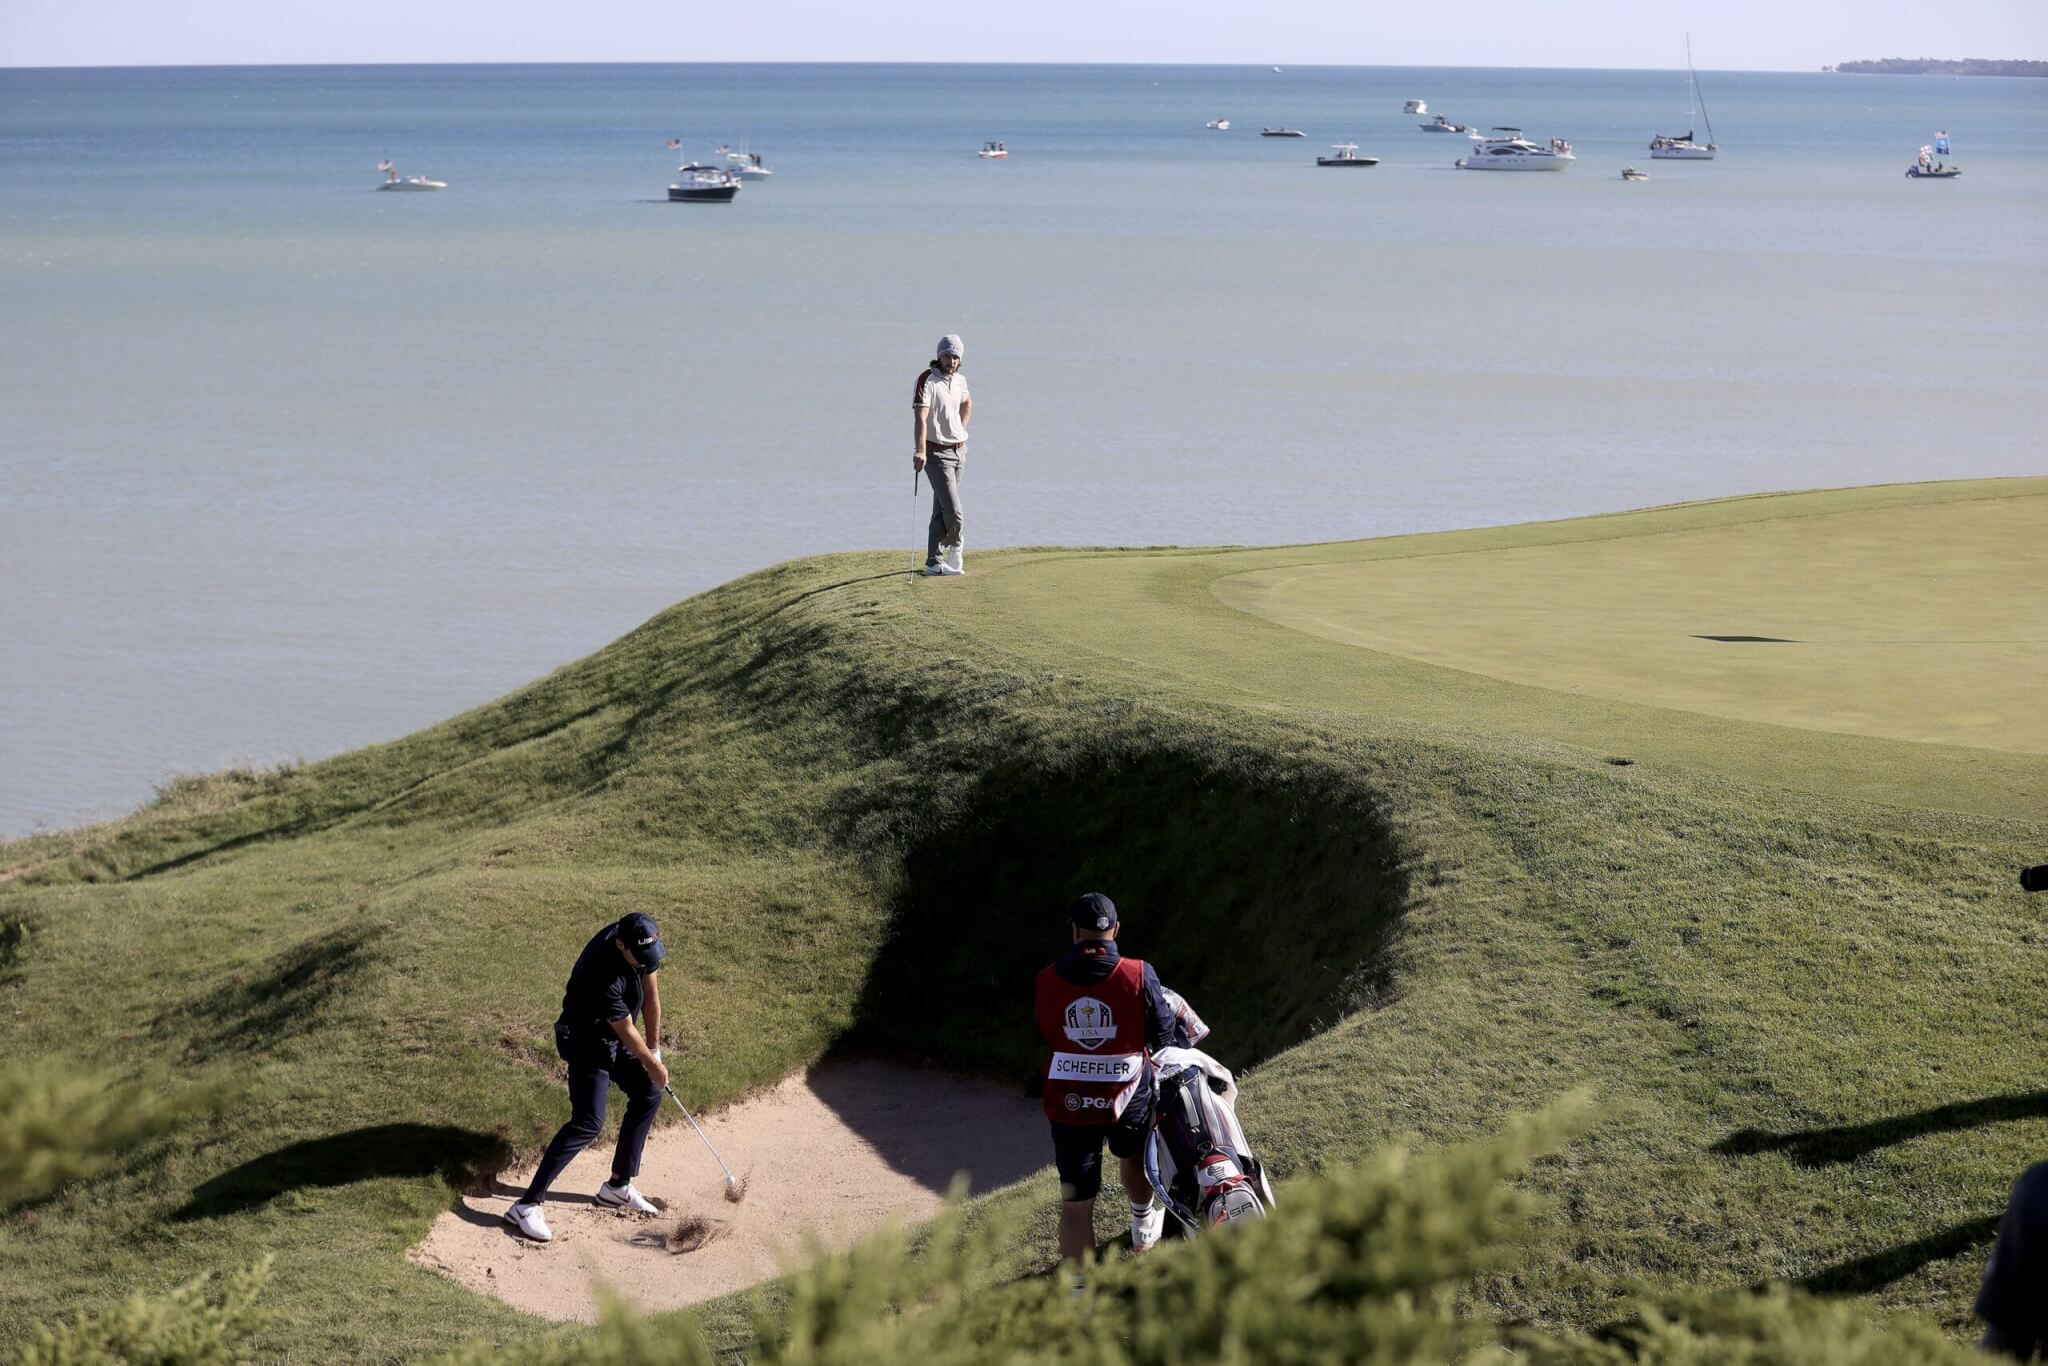 US team member Scottie Scheffler (L) hits out of a bunker on the eighth hole as European team member Tommy Fleetwood of England (Top) looks on during the Four-Ball matches on the pandemic-delayed 2020 Ryder Cup golf tournament at the Whistling Straits golf course in Kohler, Wisconsin, USA, 25 September 2021. Competition for the 43rd Ryder Cup between the US and Europe begins 24 September 2021.